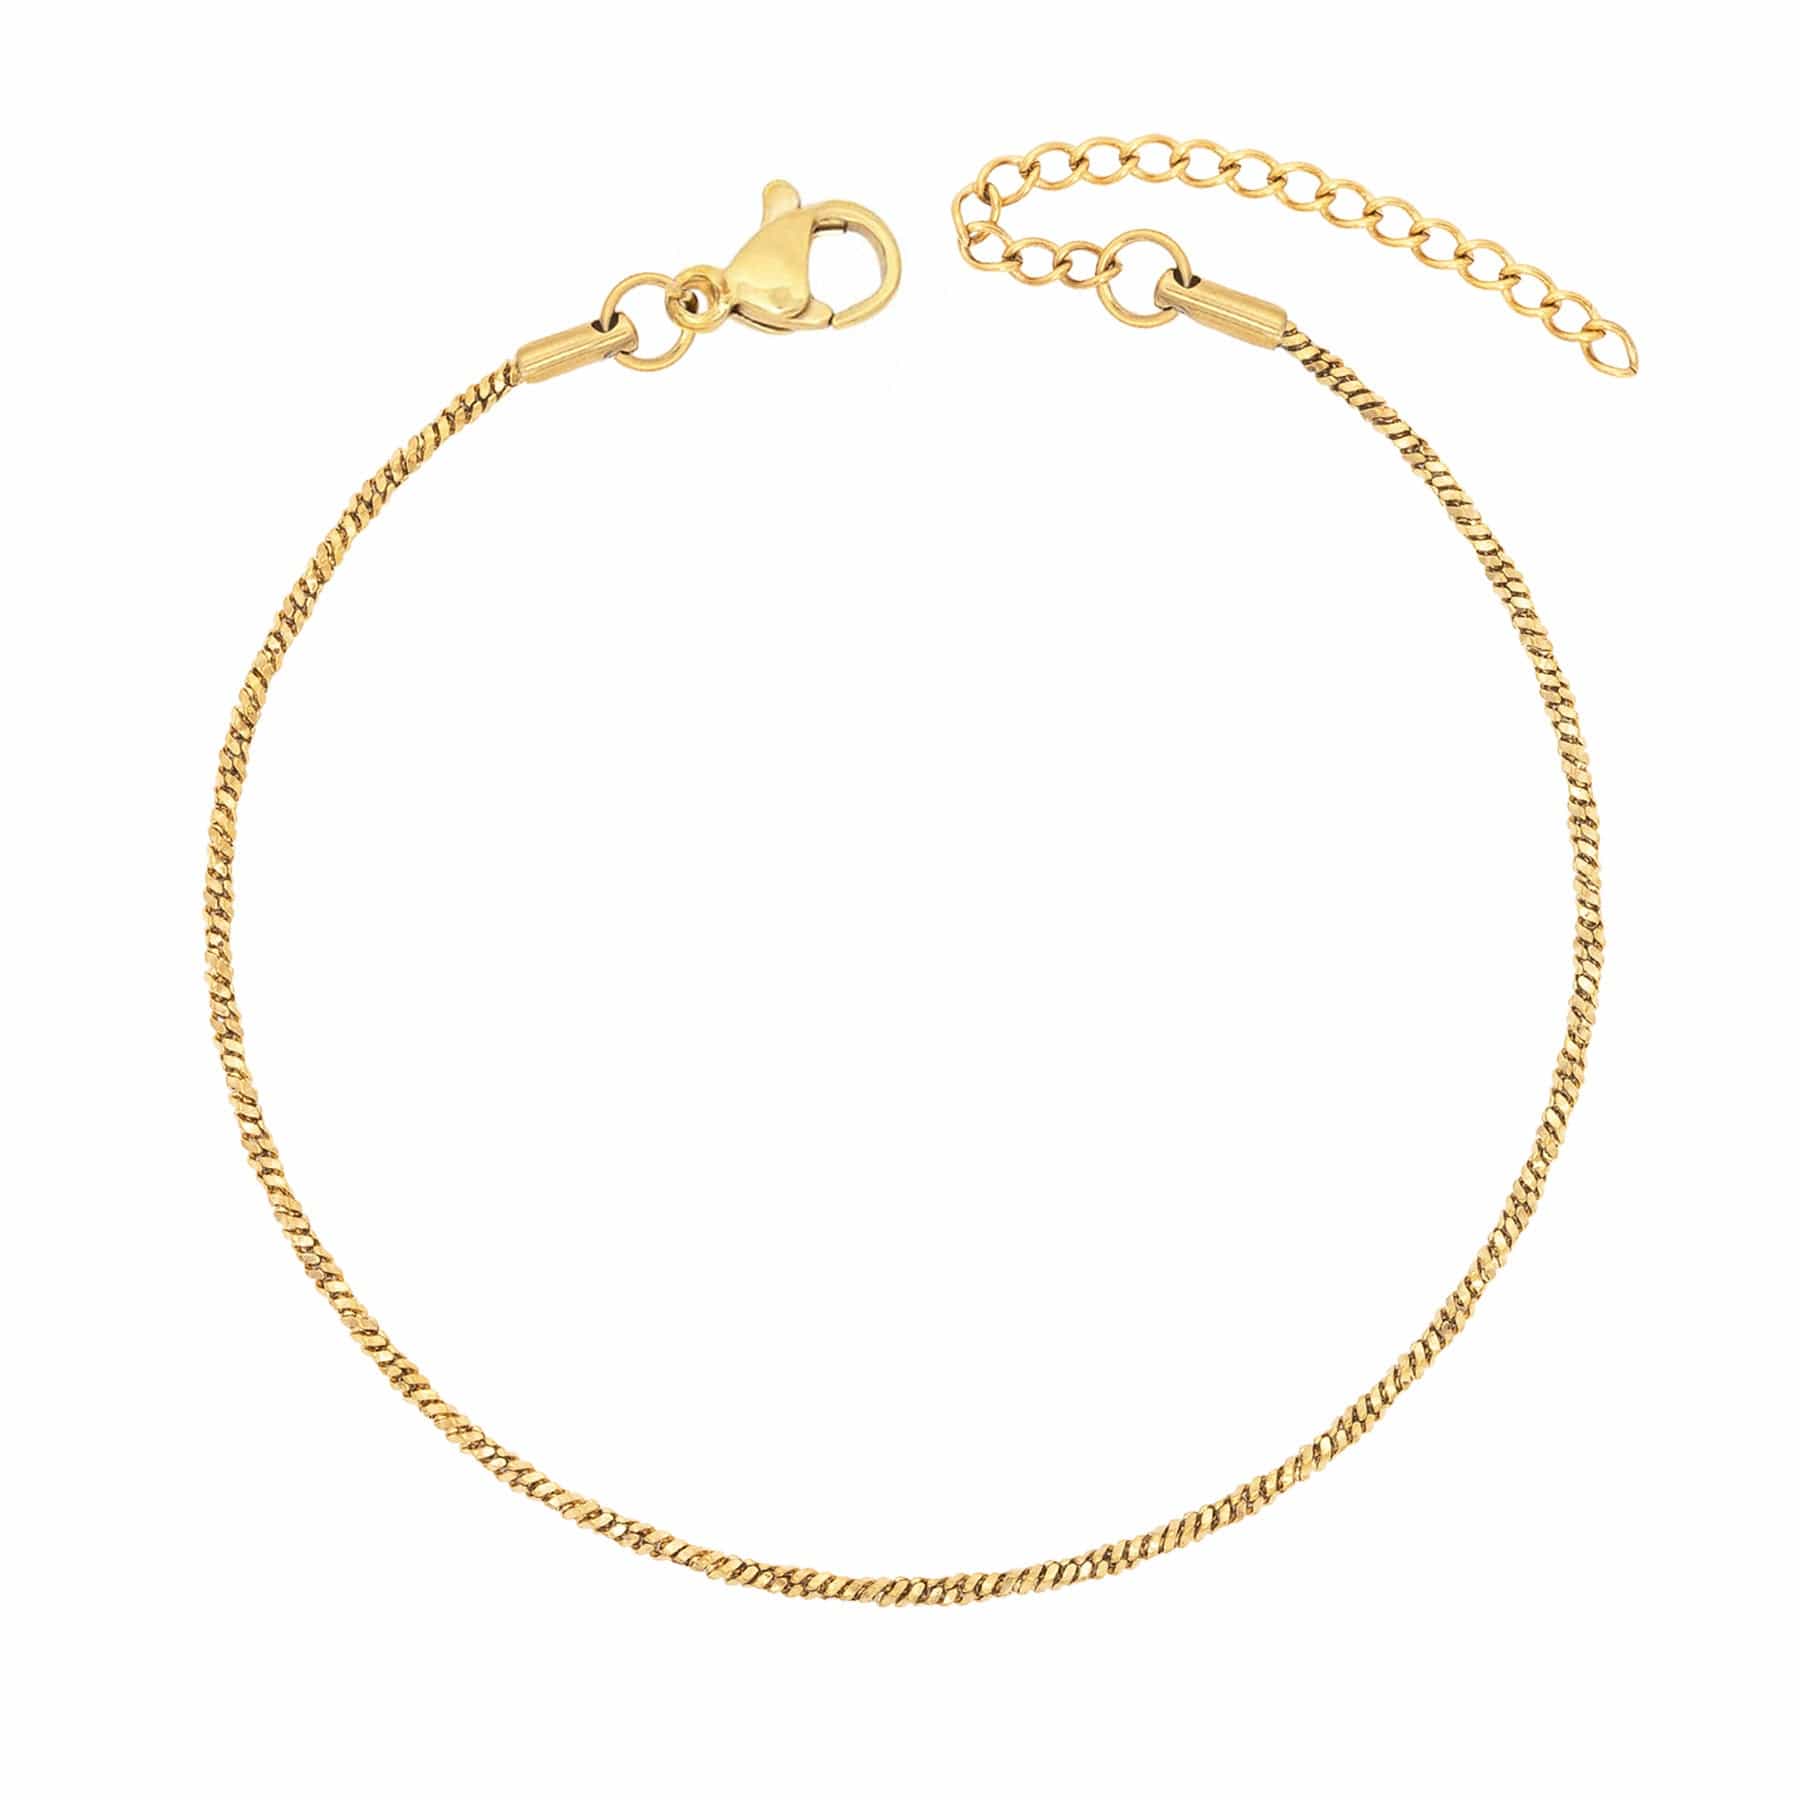 BohoMoon Stainless Steel Lyla Anklet Gold